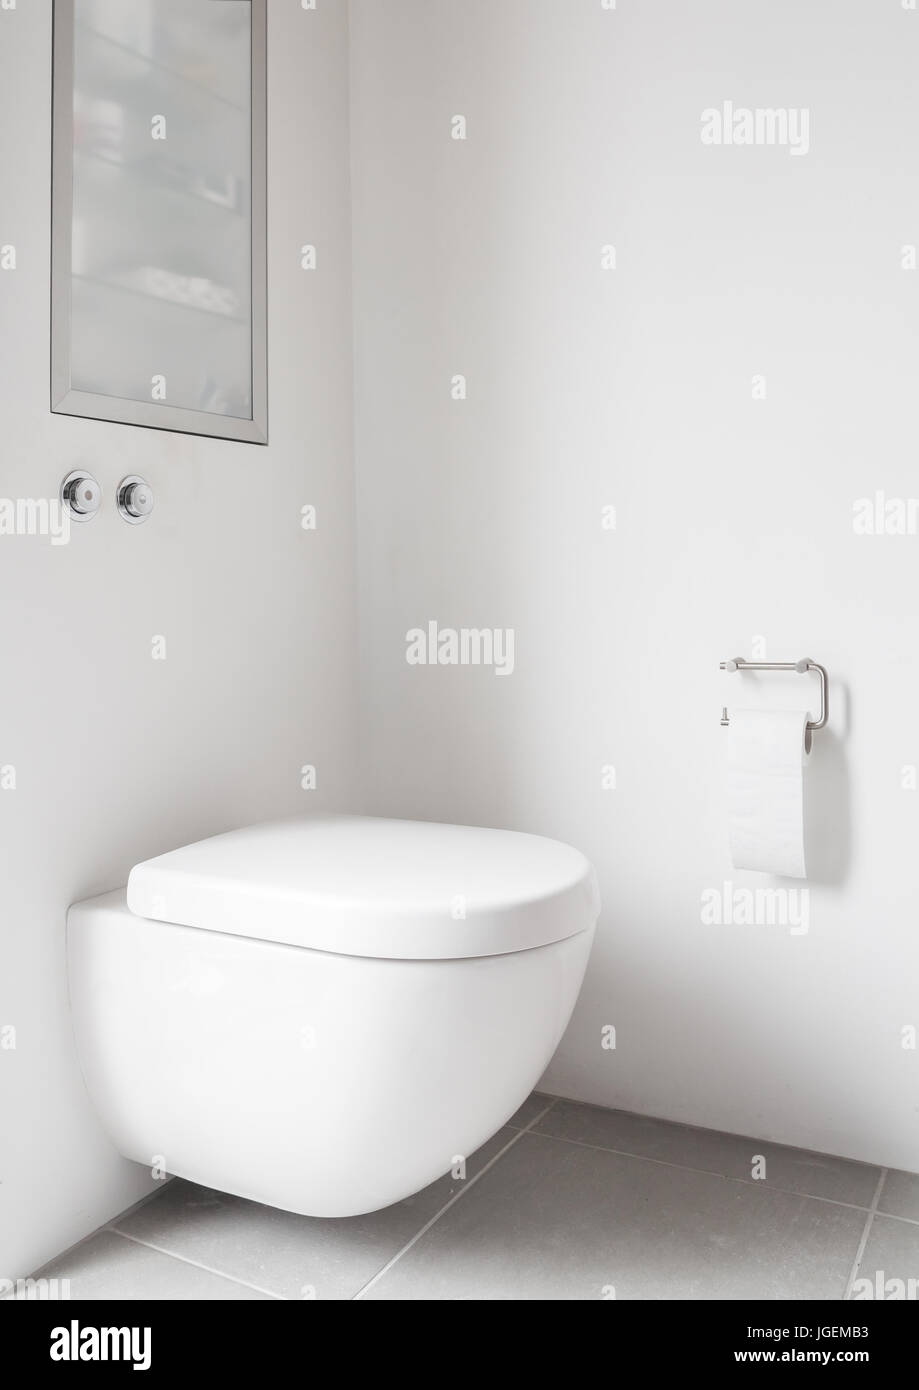 Wall hung toilet with push buttons Stock Photo